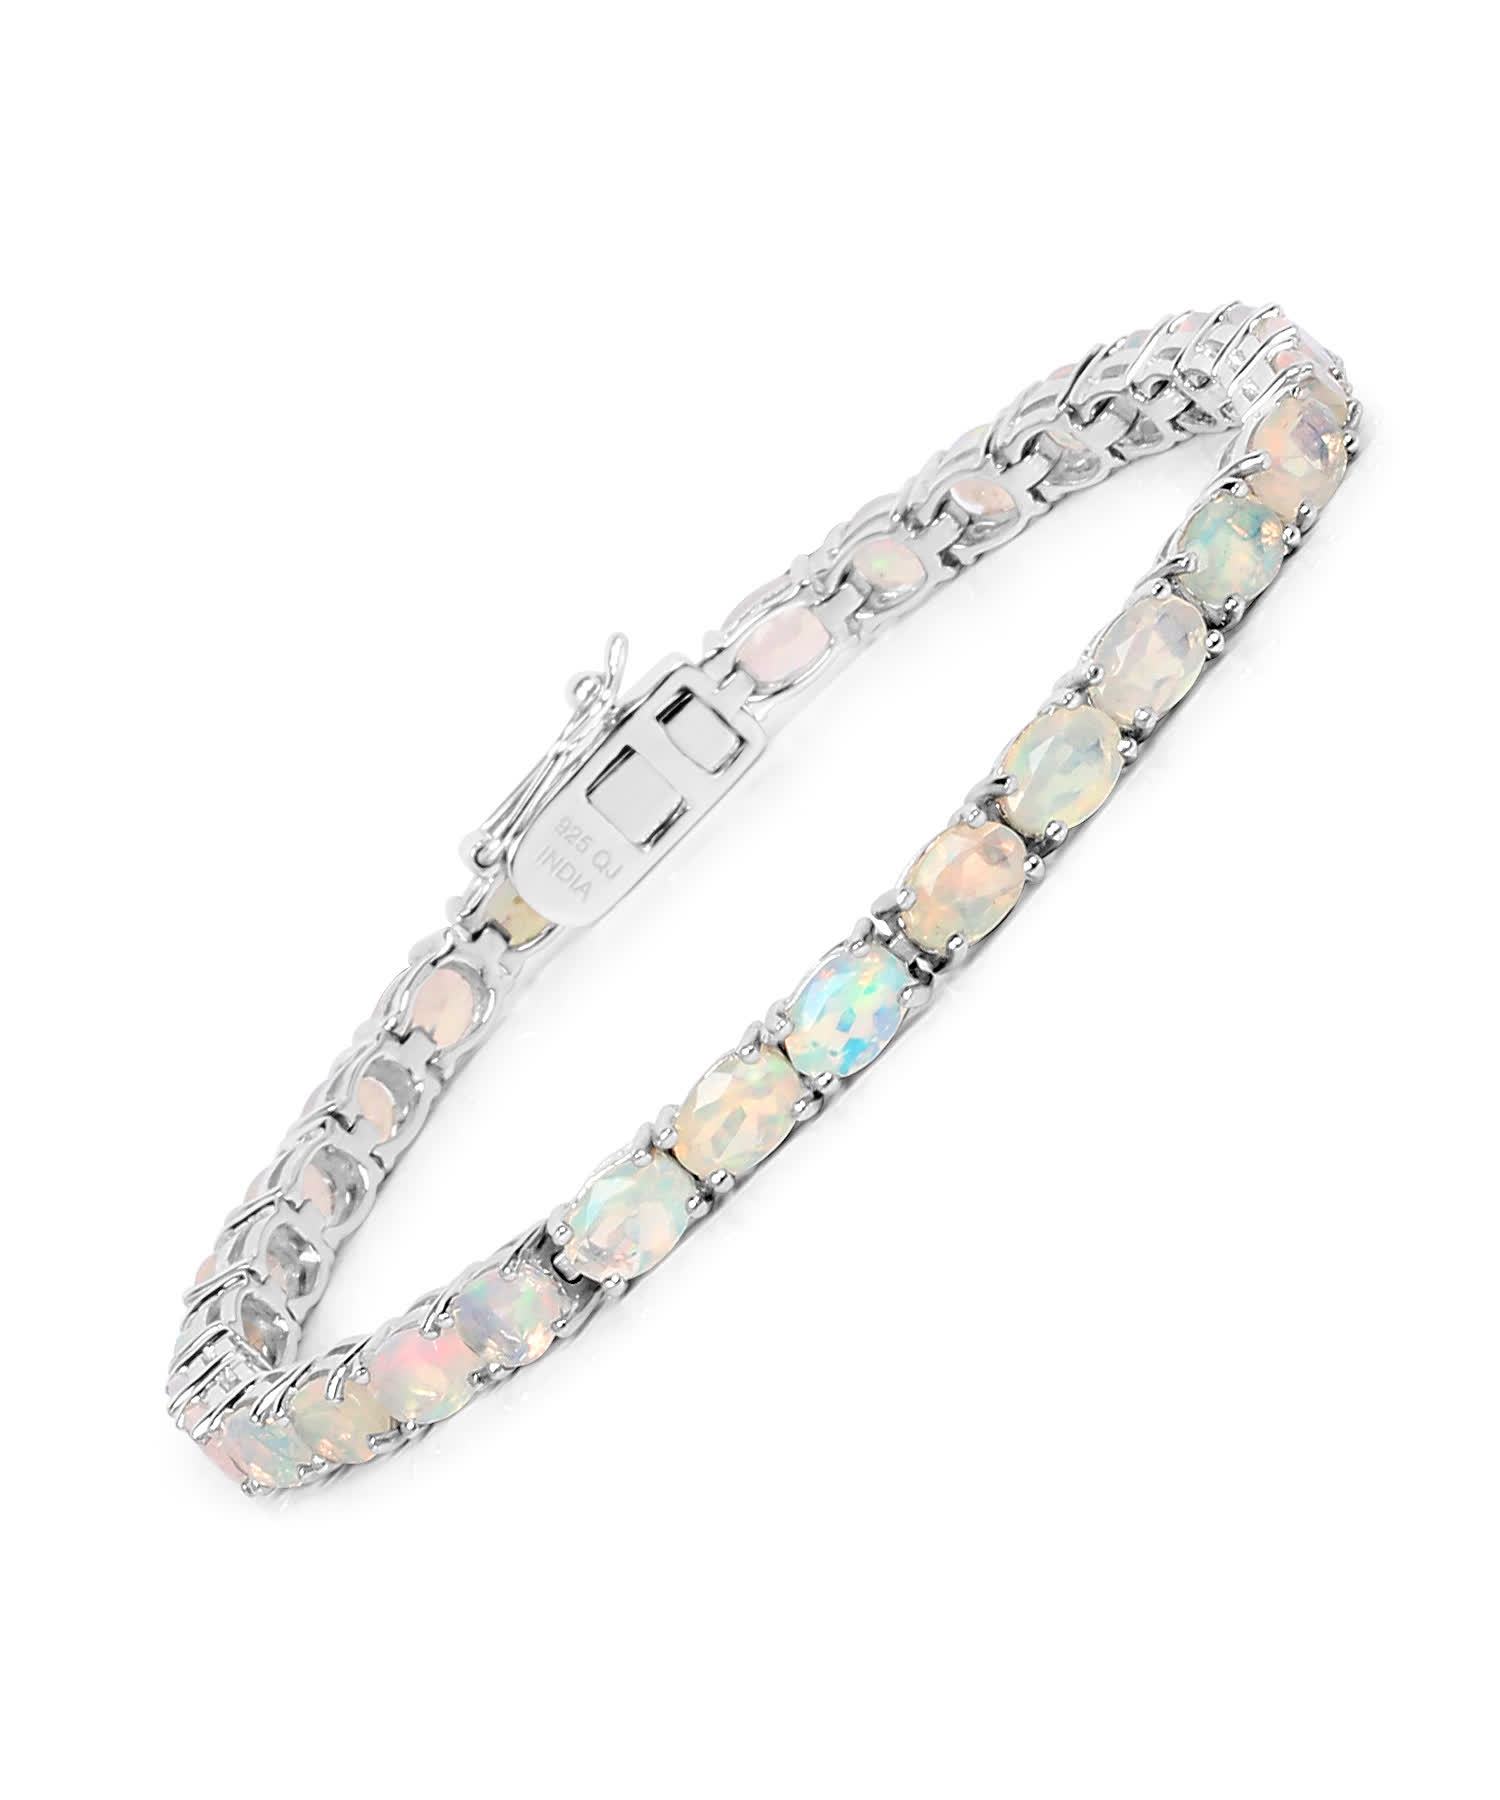 6.48ctw Natural Ethiopian Opal Rhodium Plated 925 Sterling Silver Tennis Bracelet View 1